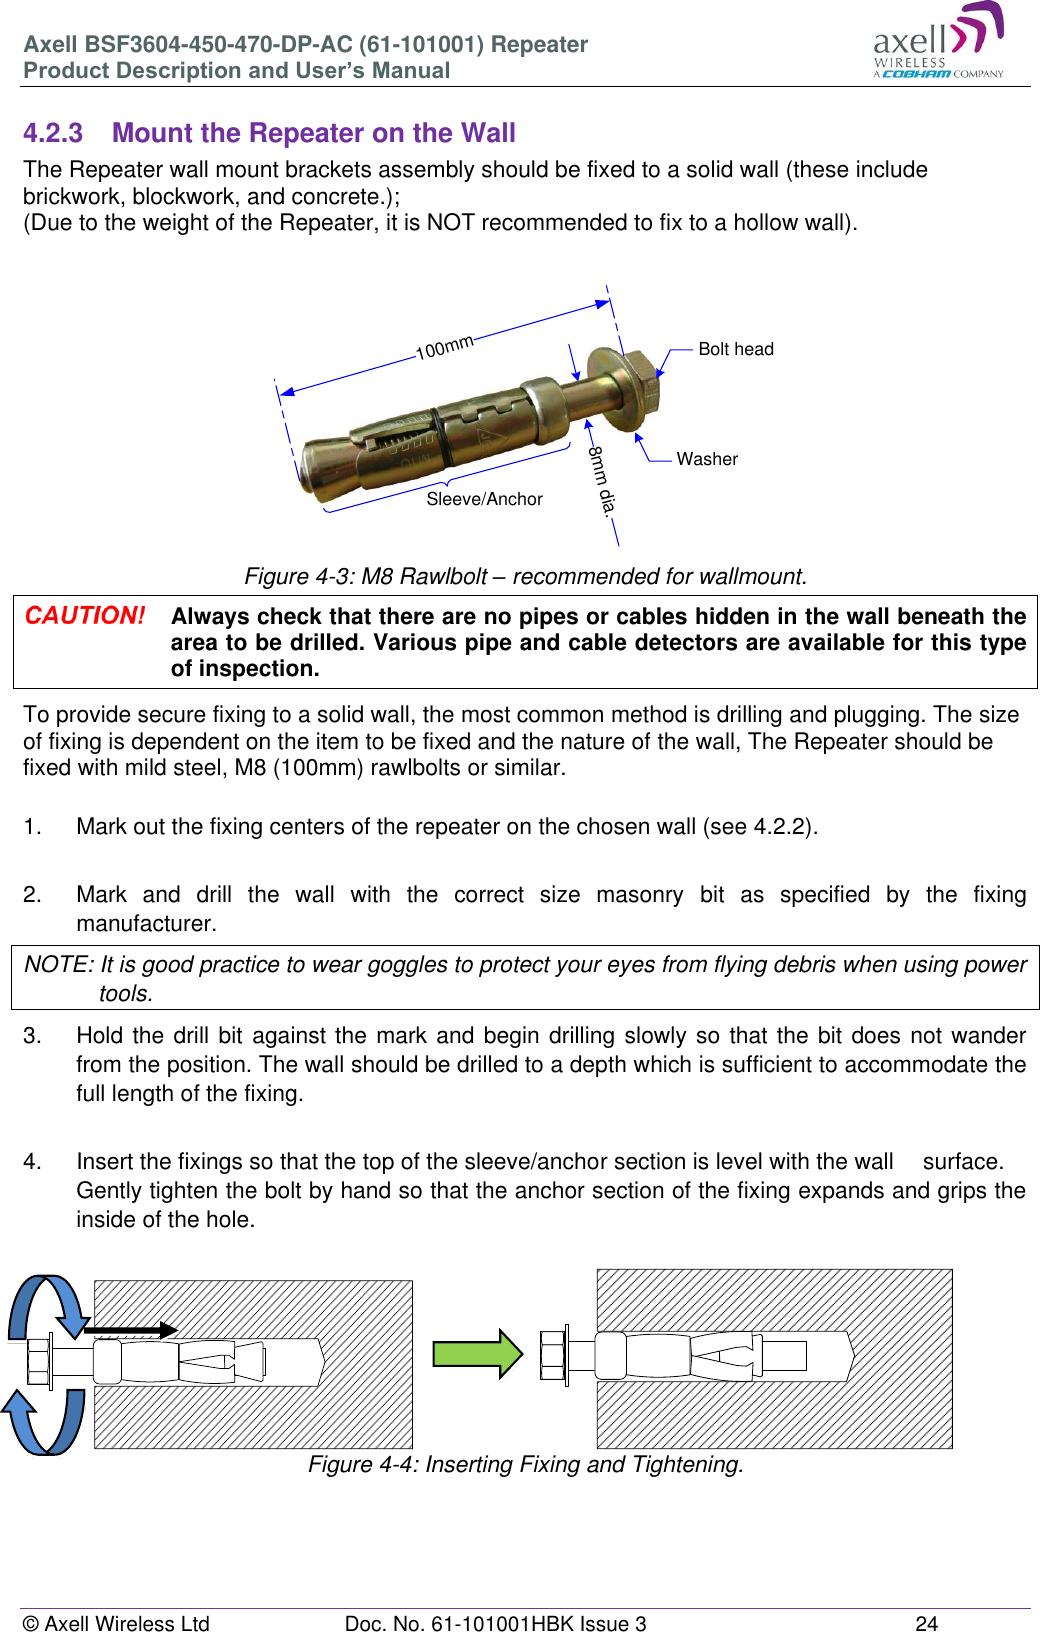 Axell BSF3604-450-470-DP-AC (61-101001) Repeater Product Description and User’s Manual © Axell Wireless Ltd  Doc. No. 61-101001HBK Issue 3  24  100mm8mm dia.Bolt headWasherSleeve/Anchor 4.2.3  Mount the Repeater on the Wall The Repeater wall mount brackets assembly should be fixed to a solid wall (these include brickwork, blockwork, and concrete.);  (Due to the weight of the Repeater, it is NOT recommended to fix to a hollow wall).       Figure 4-3: M8 Rawlbolt – recommended for wallmount.  Always check that there are no pipes or cables hidden in the wall beneath the area to be drilled. Various pipe and cable detectors are available for this type of inspection. To provide secure fixing to a solid wall, the most common method is drilling and plugging. The size of fixing is dependent on the item to be fixed and the nature of the wall, The Repeater should be fixed with mild steel, M8 (100mm) rawlbolts or similar.  1.  Mark out the fixing centers of the repeater on the chosen wall (see 4.2.2).  2.  Mark  and  drill  the  wall  with  the  correct  size  masonry  bit  as  specified  by  the  fixing manufacturer. NOTE: It is good practice to wear goggles to protect your eyes from flying debris when using power tools. 3.  Hold the drill bit  against the mark and begin drilling slowly so that the bit does not wander from the position. The wall should be drilled to a depth which is sufficient to accommodate the full length of the fixing.  4.  Insert the fixings so that the top of the sleeve/anchor section is level with the wall   surface. Gently tighten the bolt by hand so that the anchor section of the fixing expands and grips the inside of the hole.                       Figure 4-4: Inserting Fixing and Tightening.    